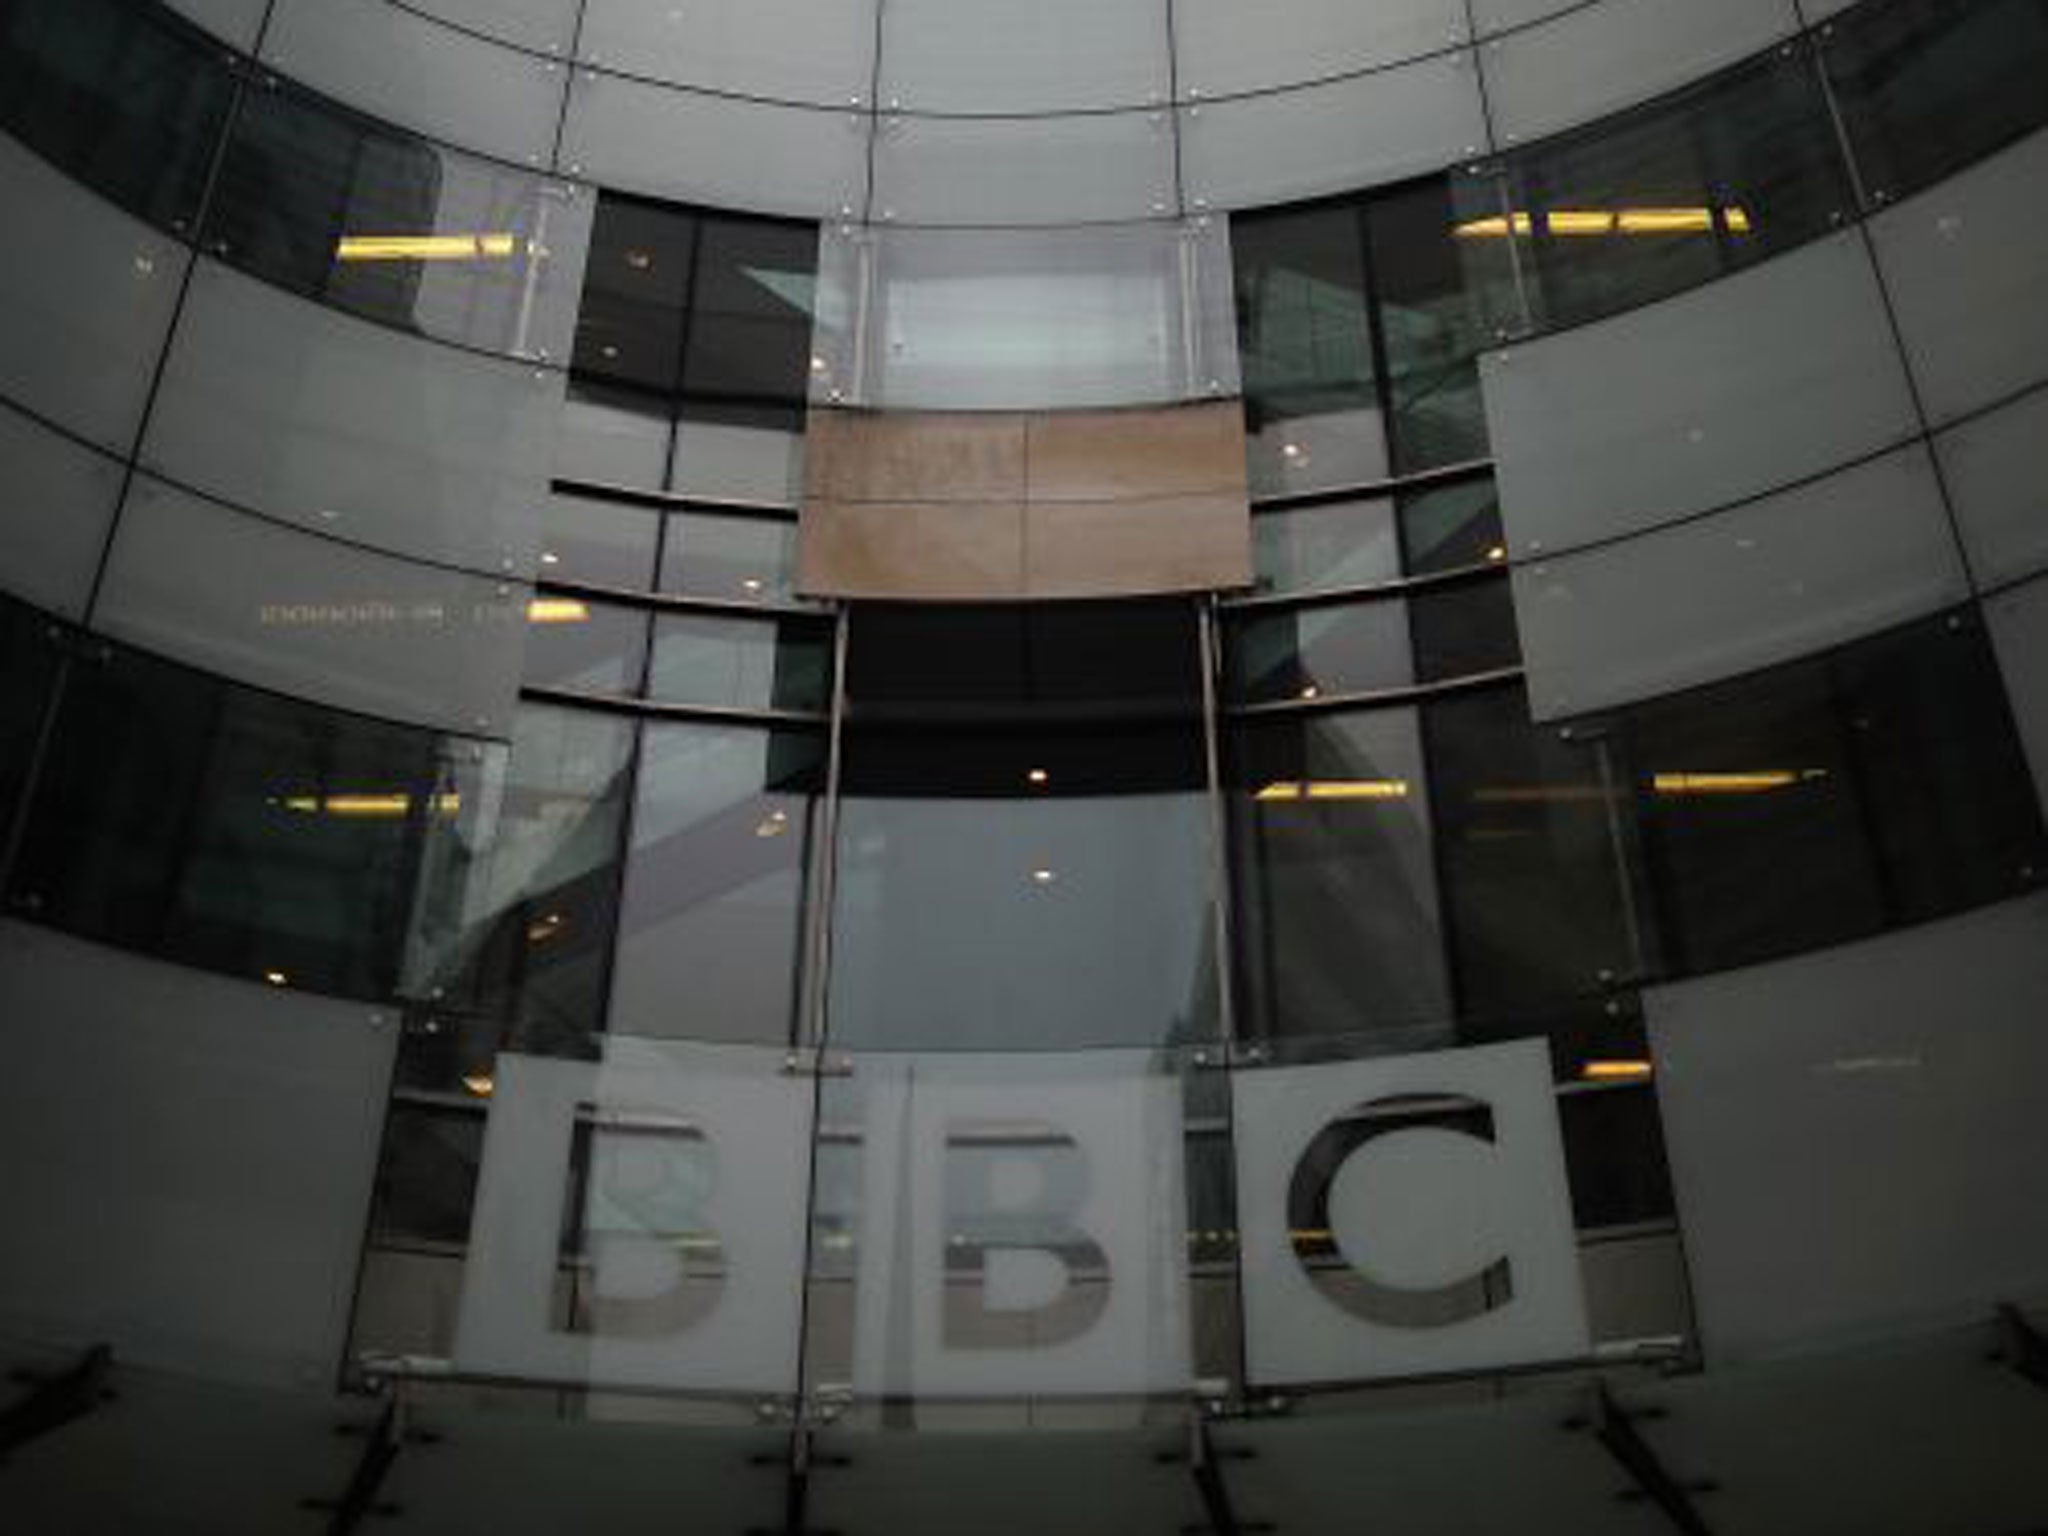 Plans to decriminalise non-payment of television licence fees would cost the BBC £500m according to estimates drawn up within the Corporation